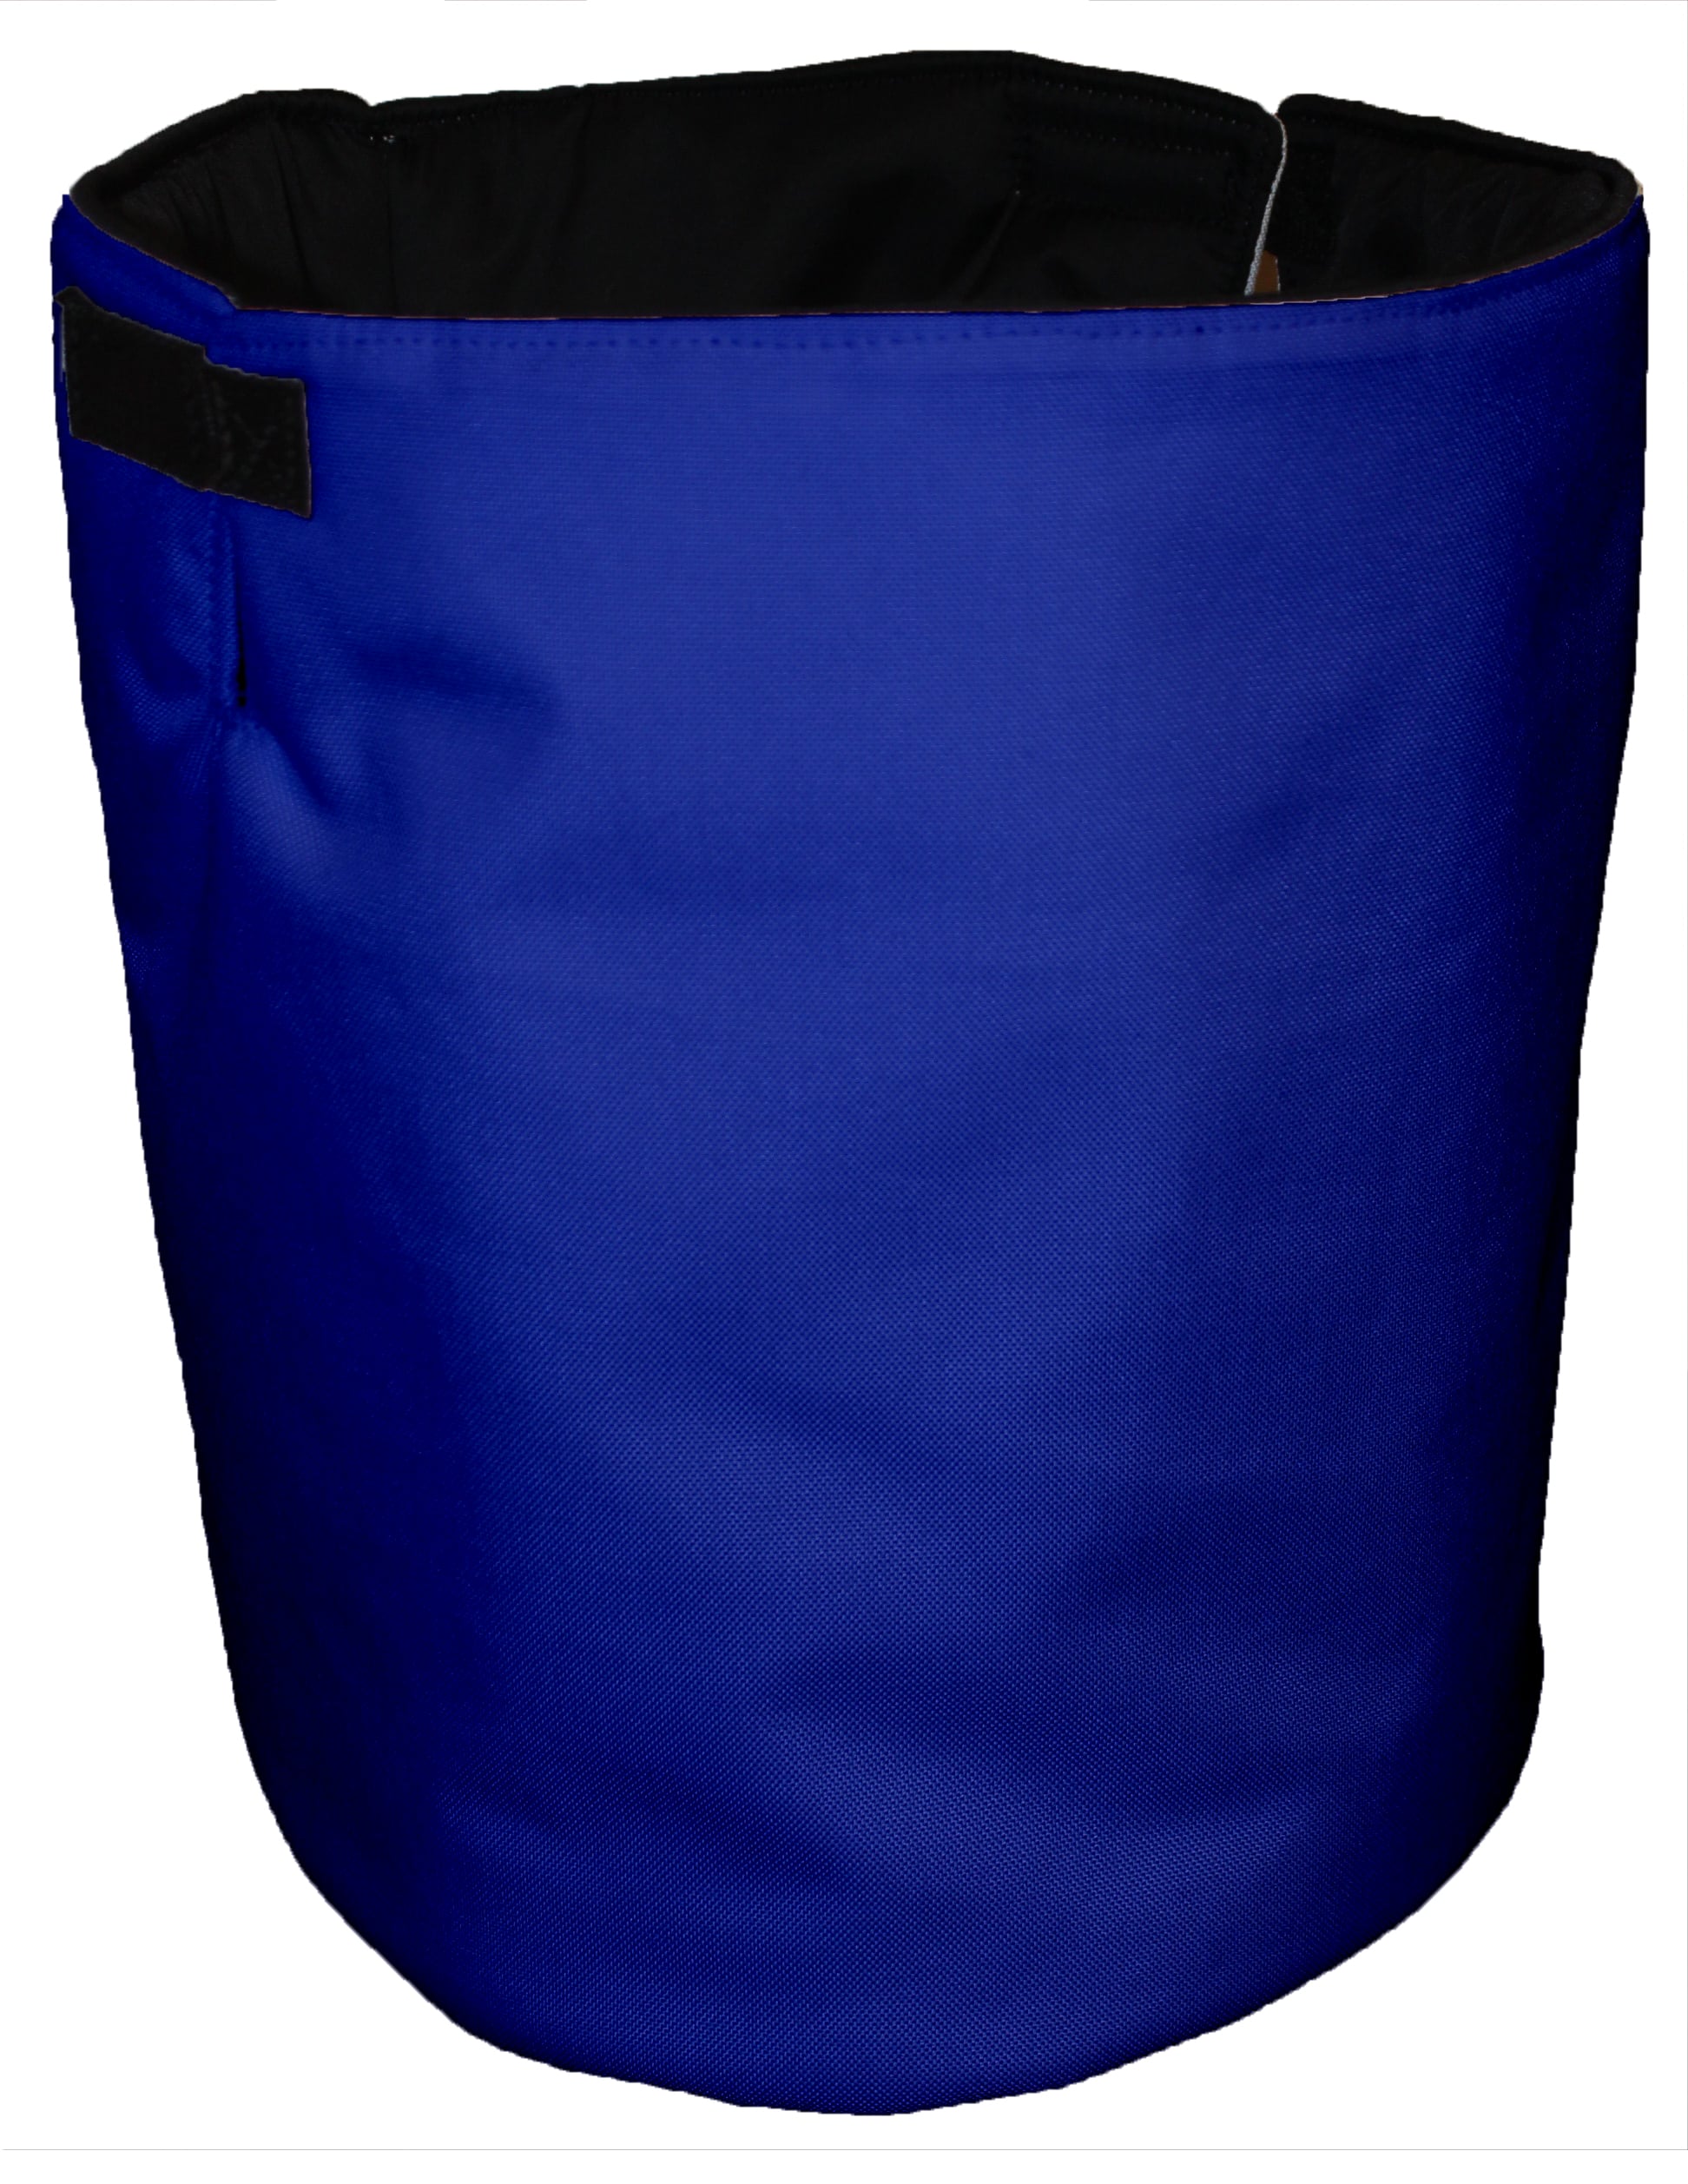 Thermal Insulated Water Bucket